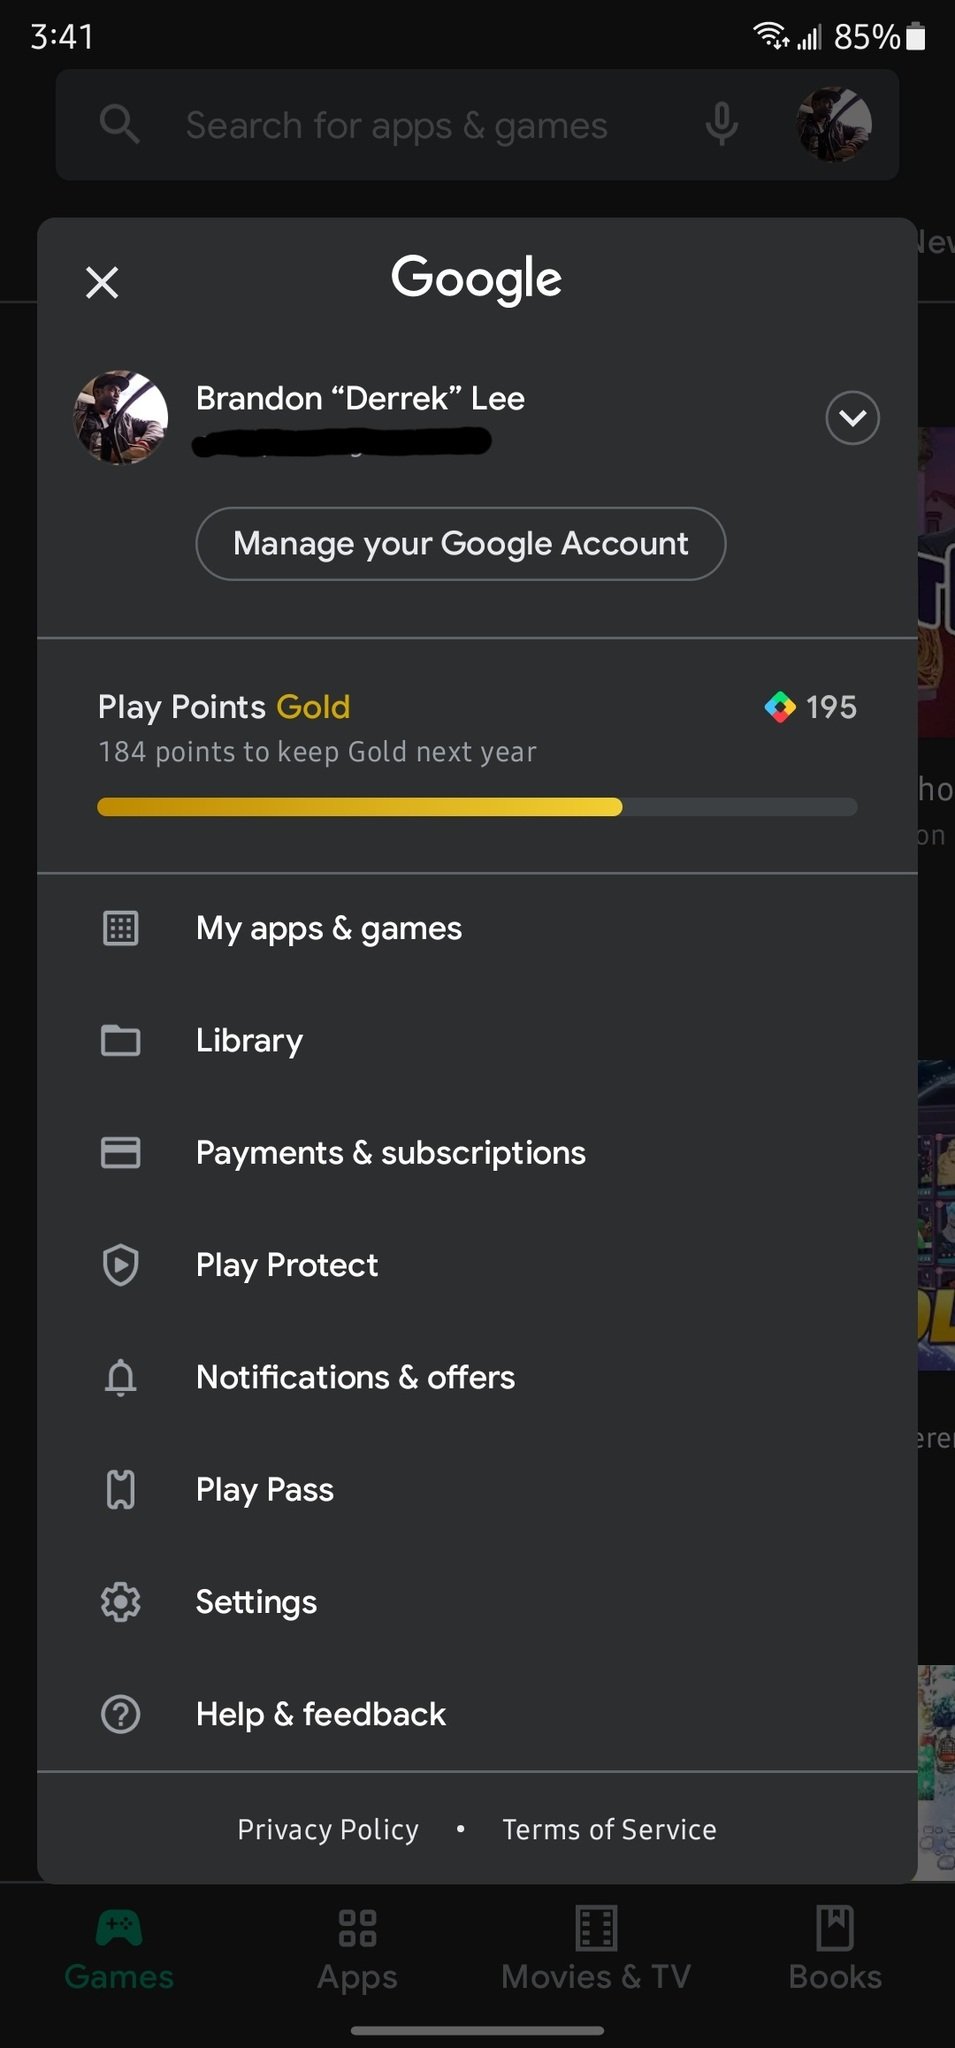 Google Play Store user interface redesign 2021